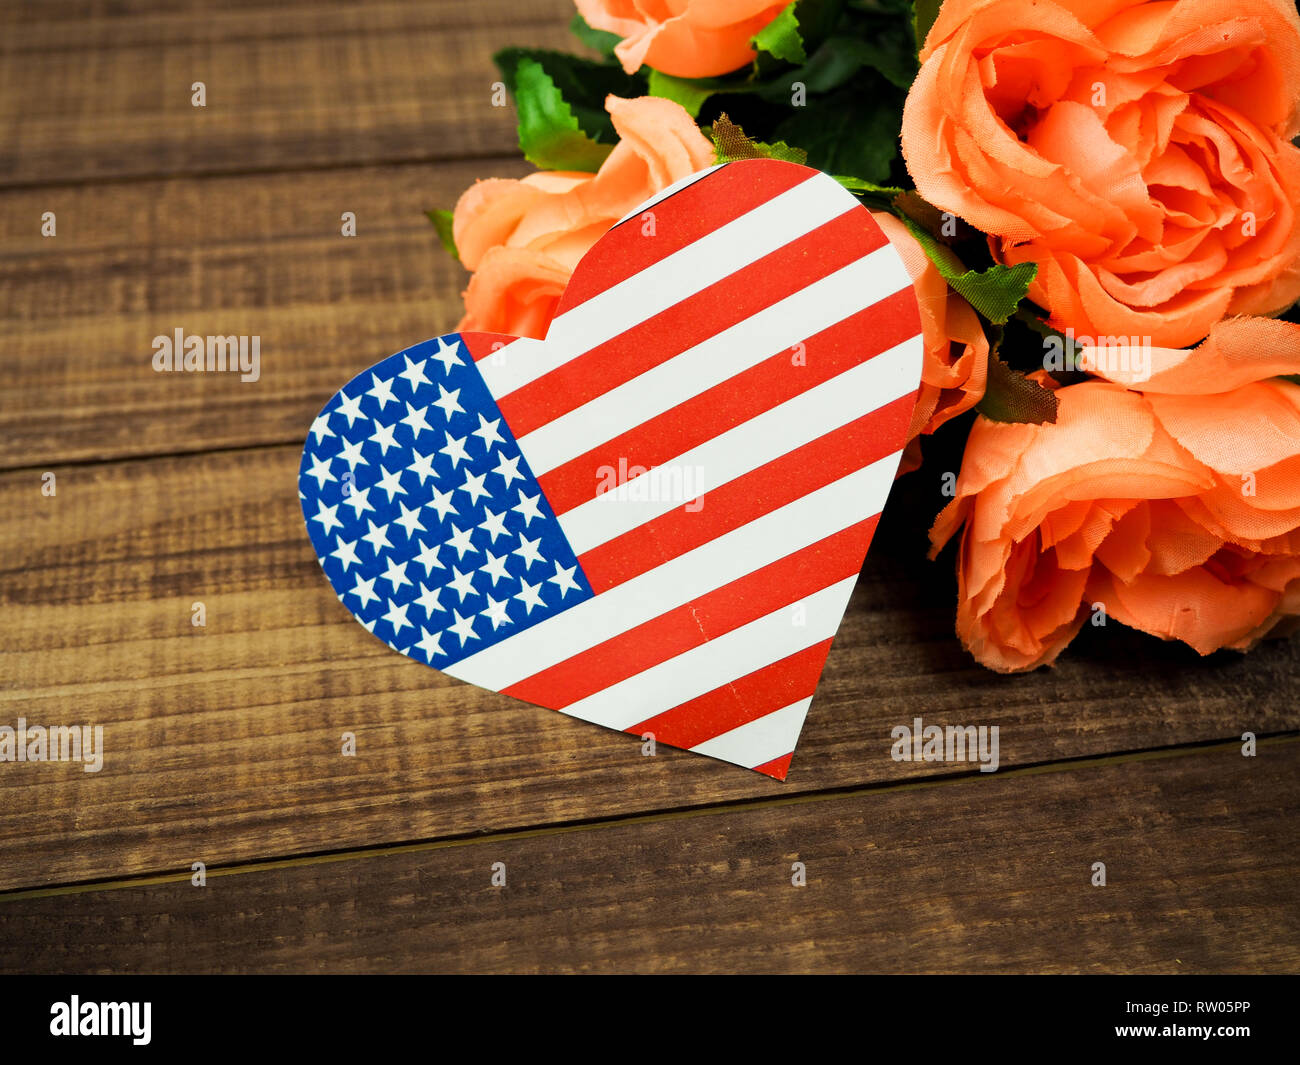 USA flag in the form of hearts and flowers on a wooden background. Stock Photo